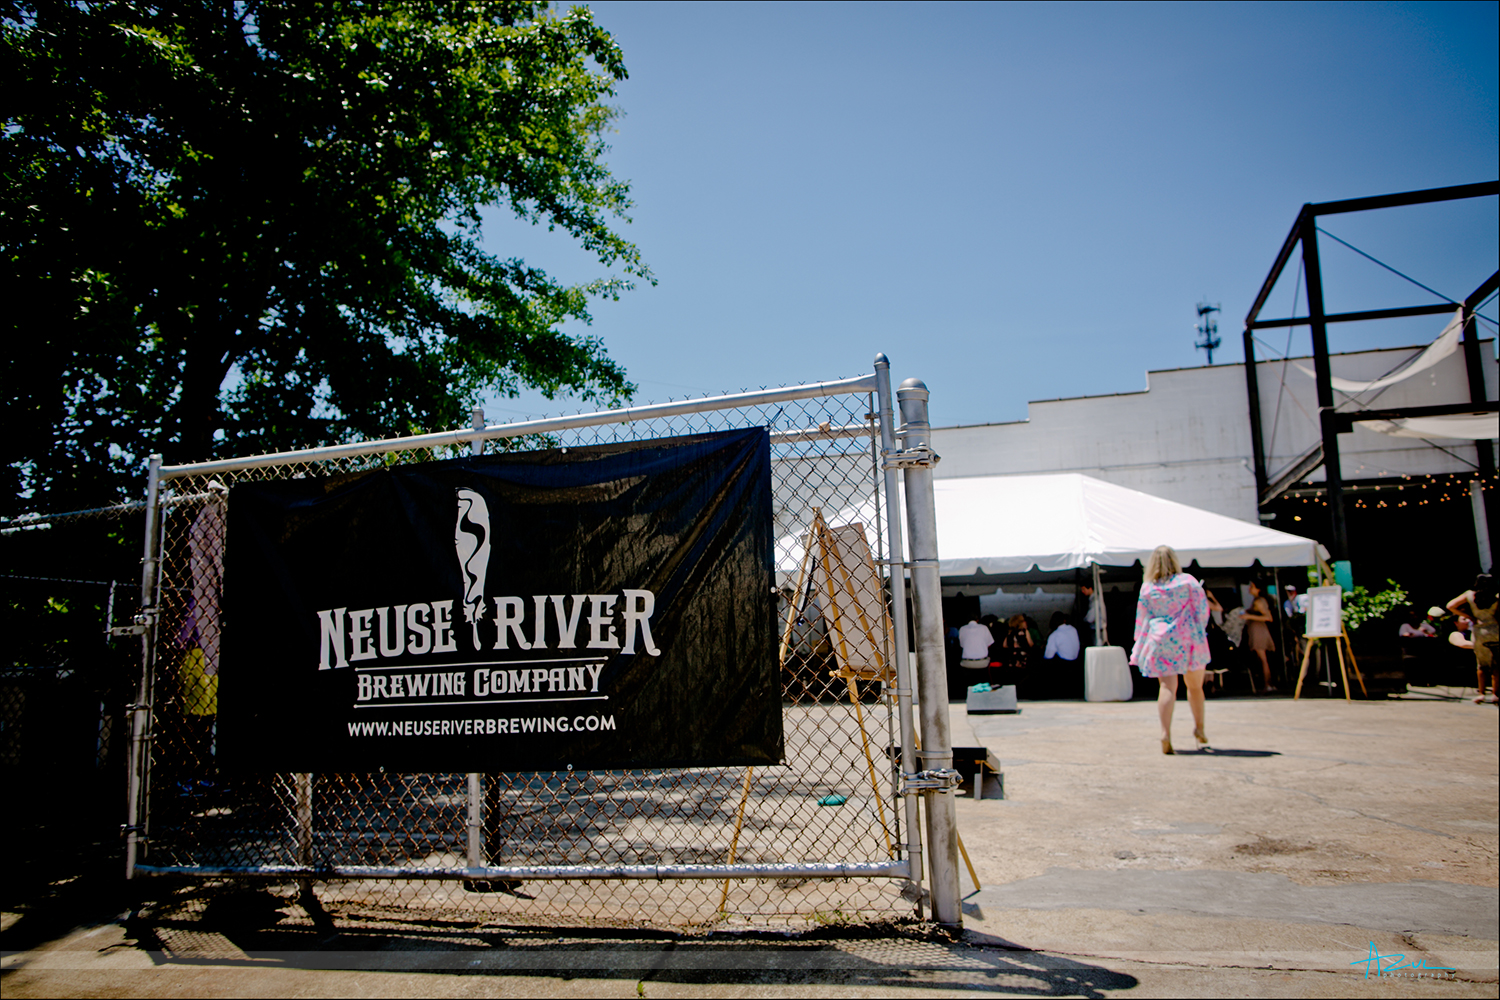 Fun wedding reception location was at Neuse River Brewing Company in Raleigh